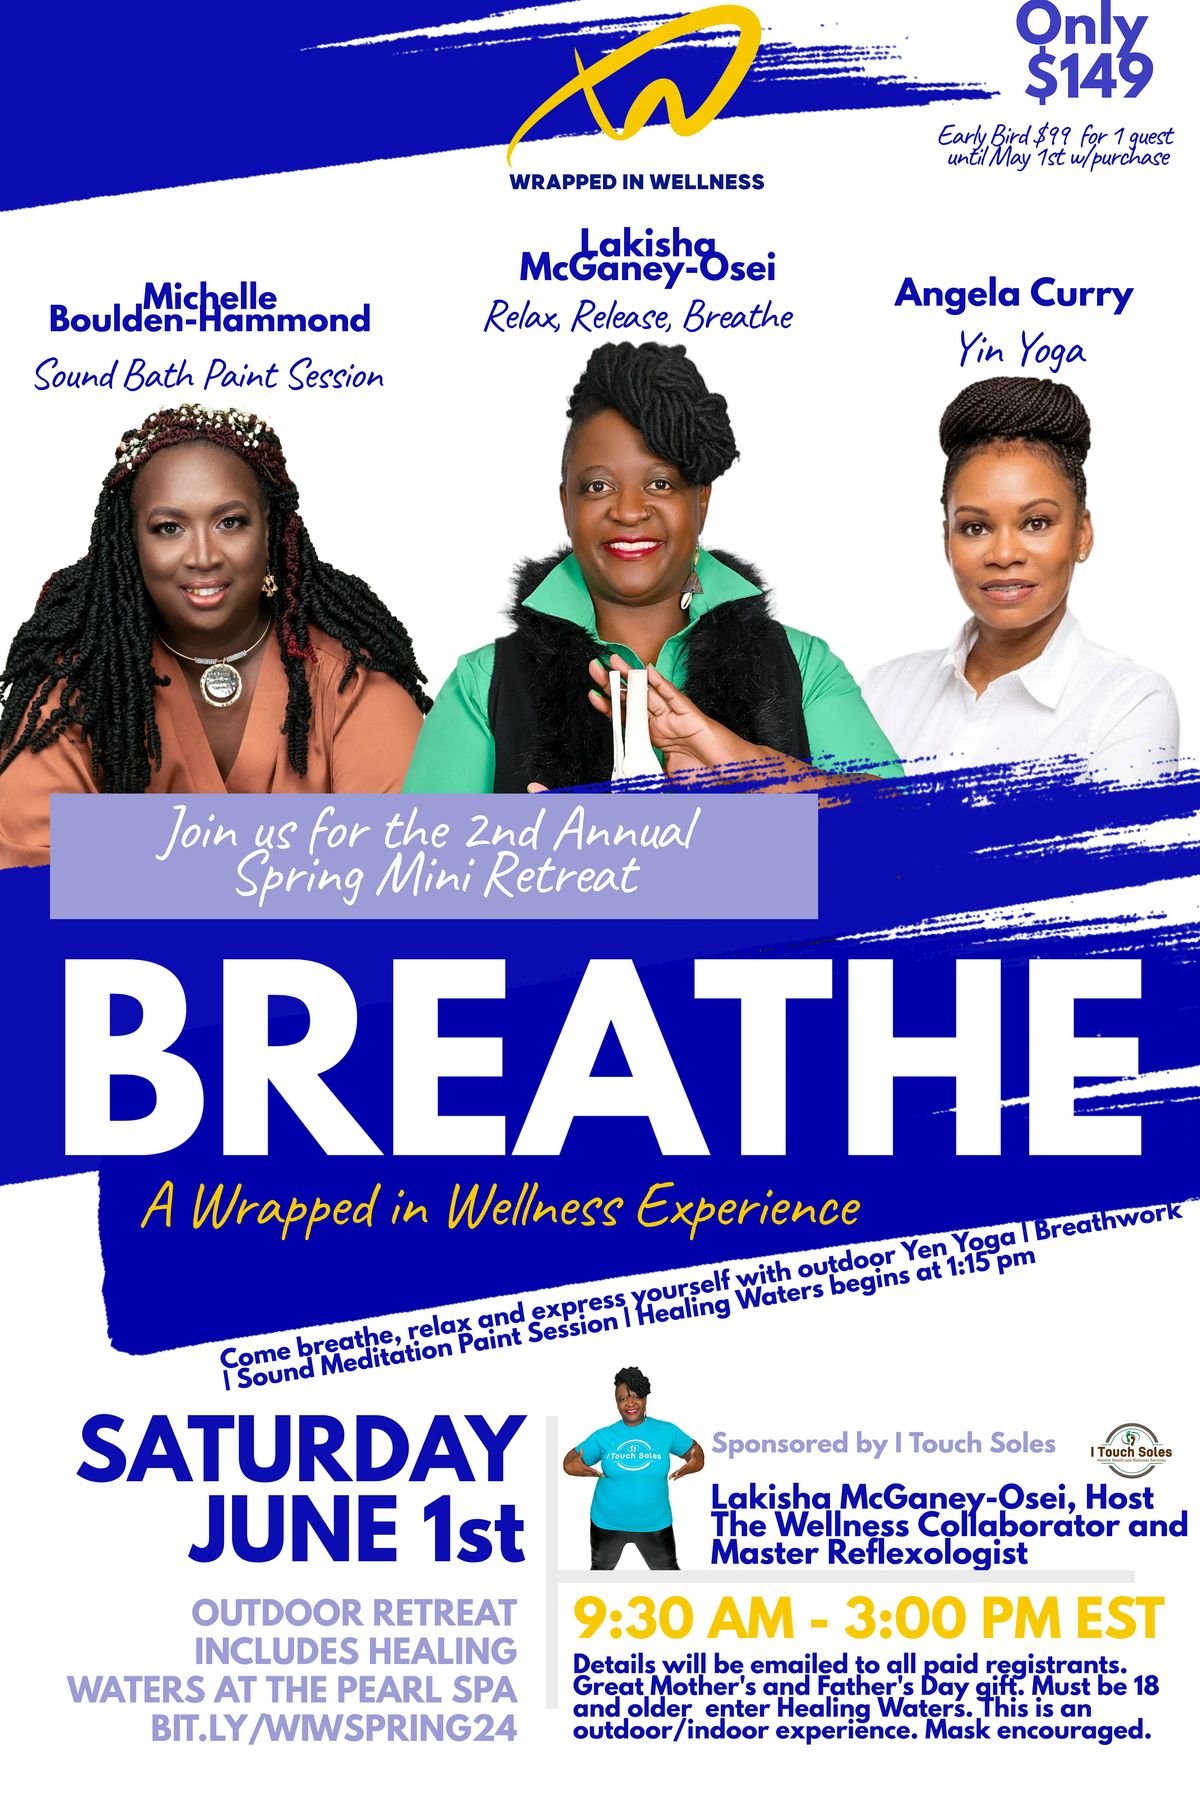 BREATHE A Wrapped in Wellness Experience